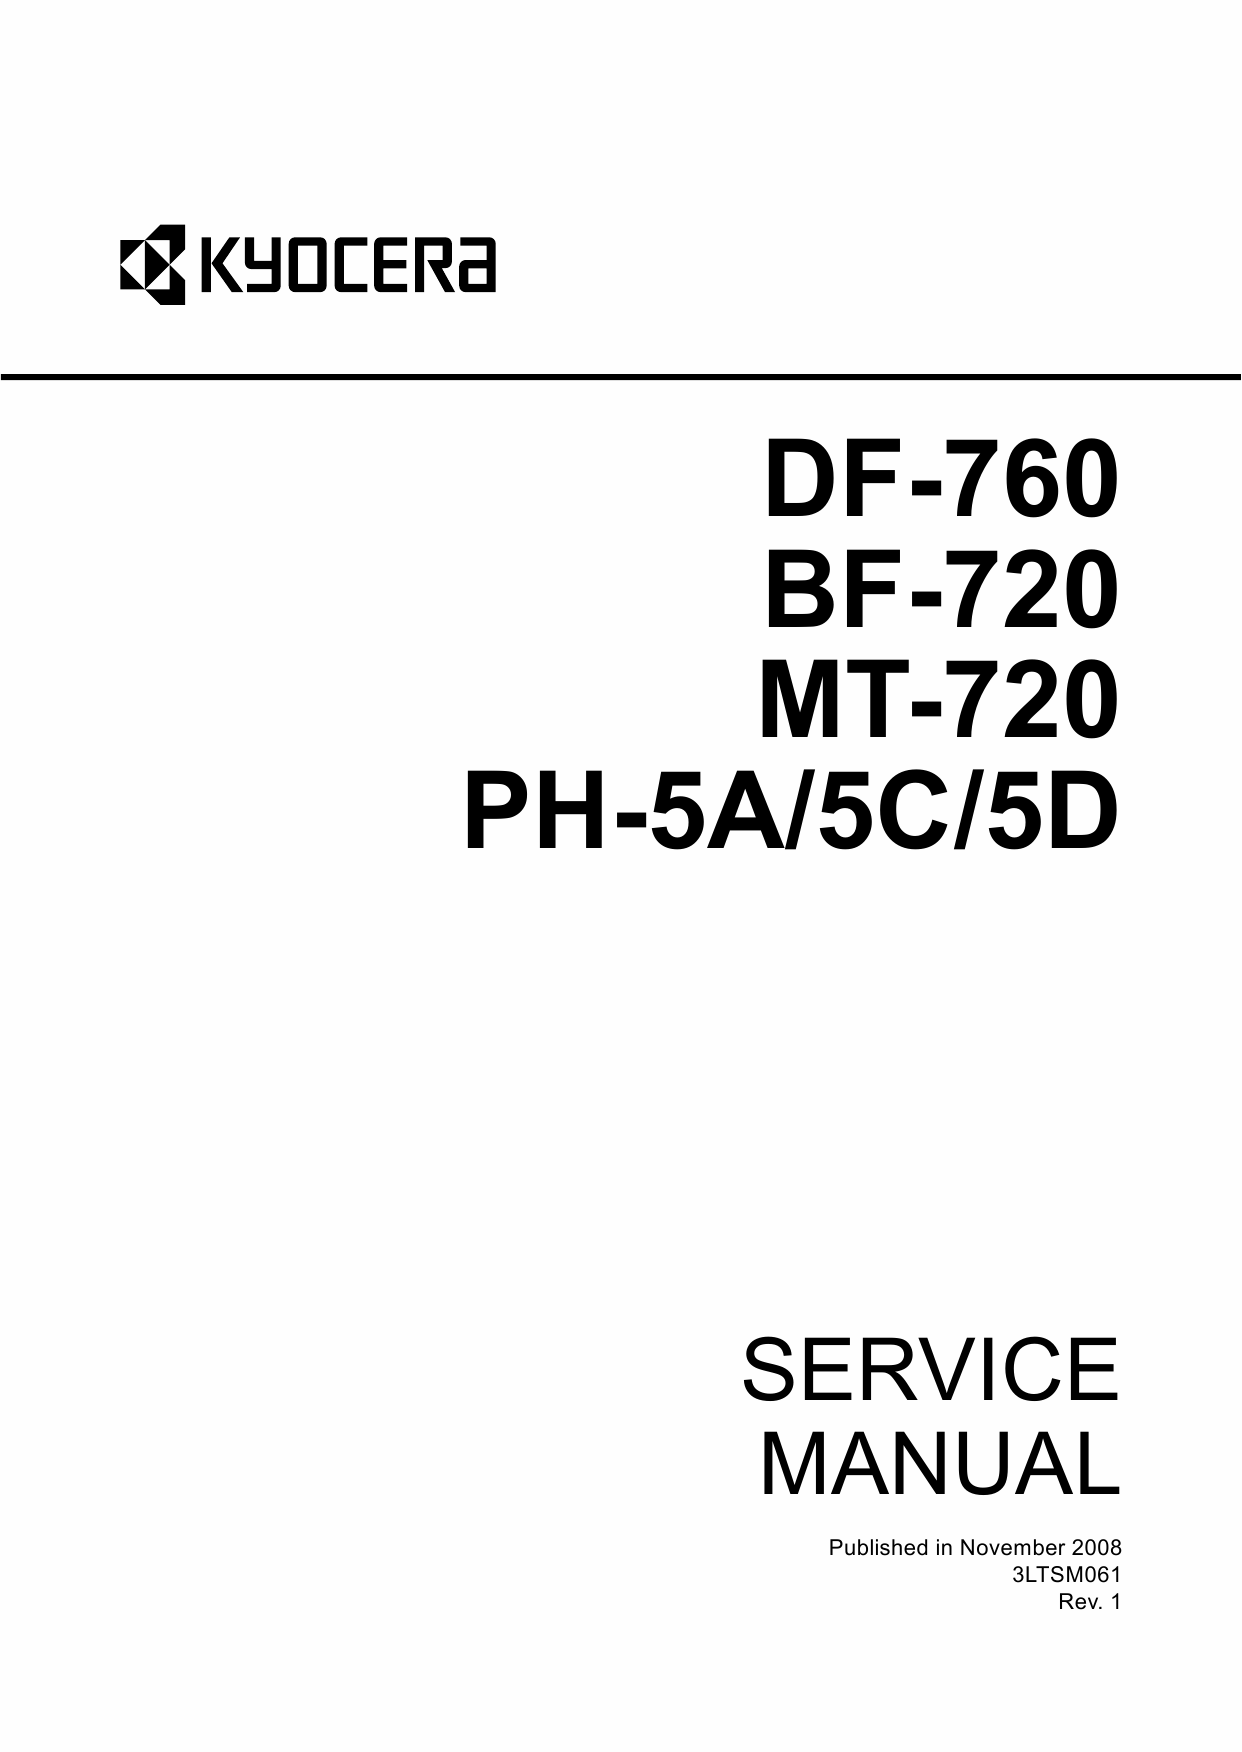 KYOCERA Options Document-Feeder DF-760 BF-720 MT-720 PH-5A 5C 5D Parts and Service Manual-1